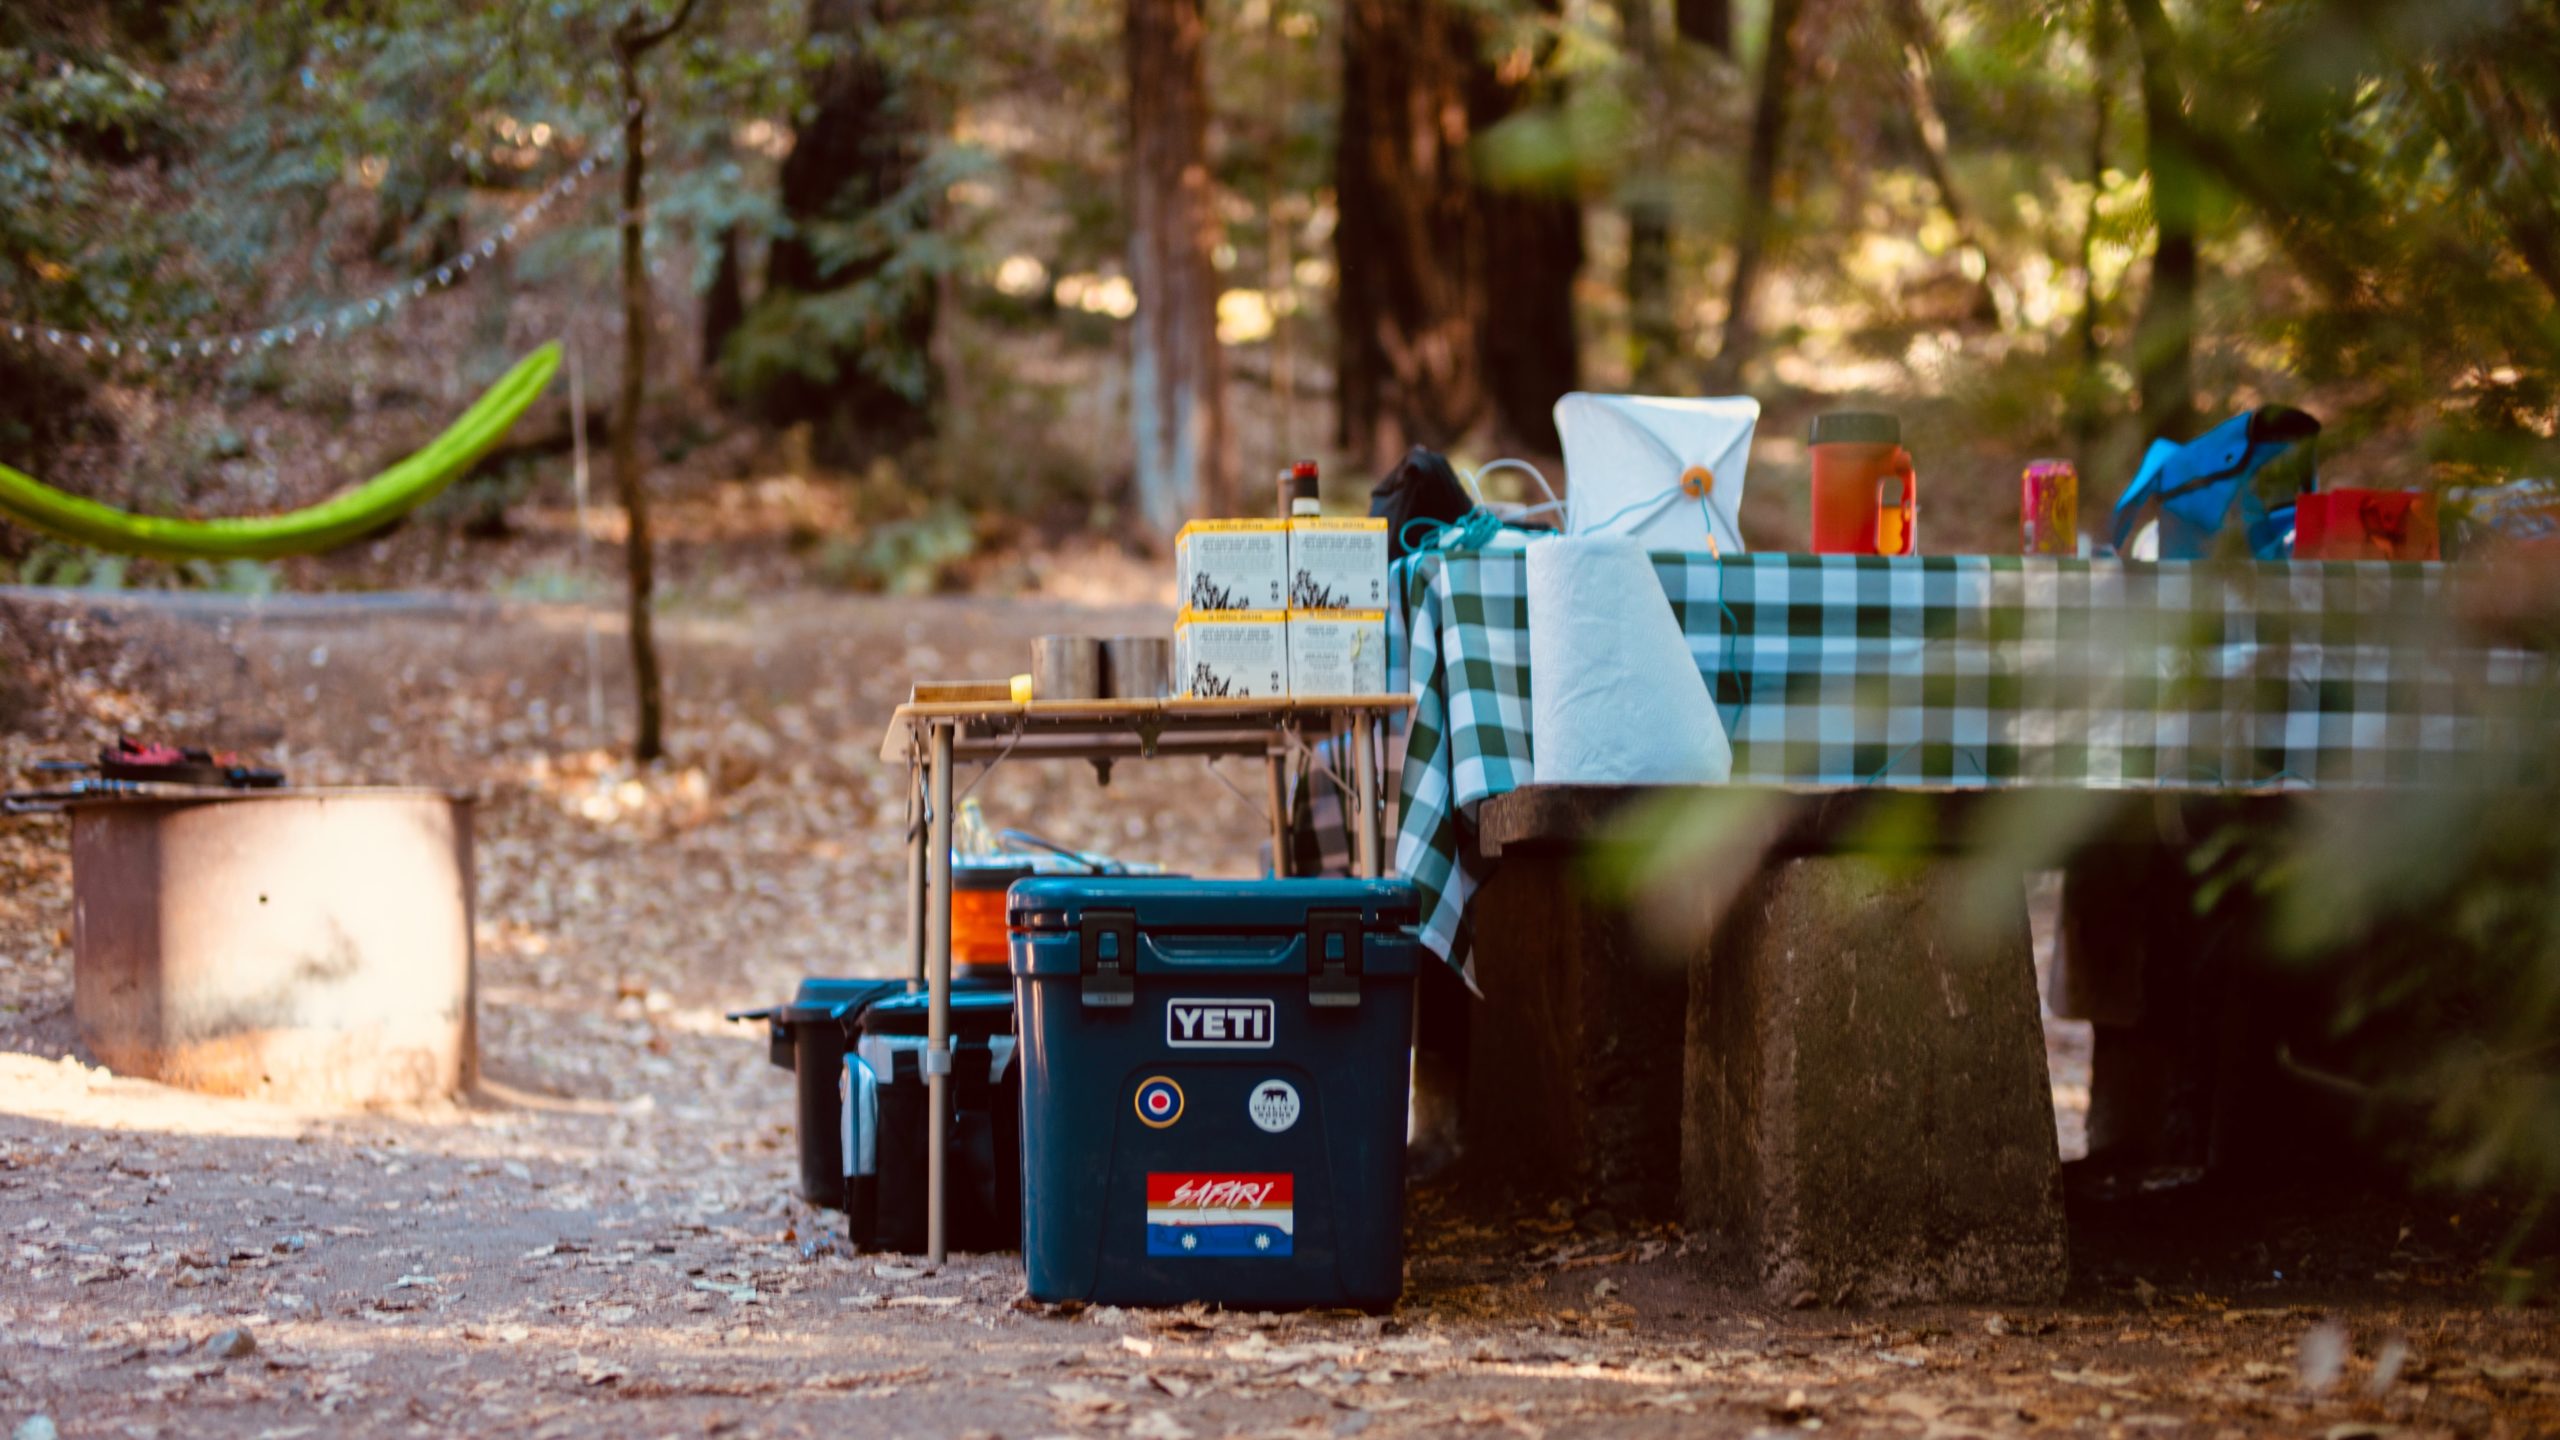 Agricampeggi campsites can provide a more relaxing experience.